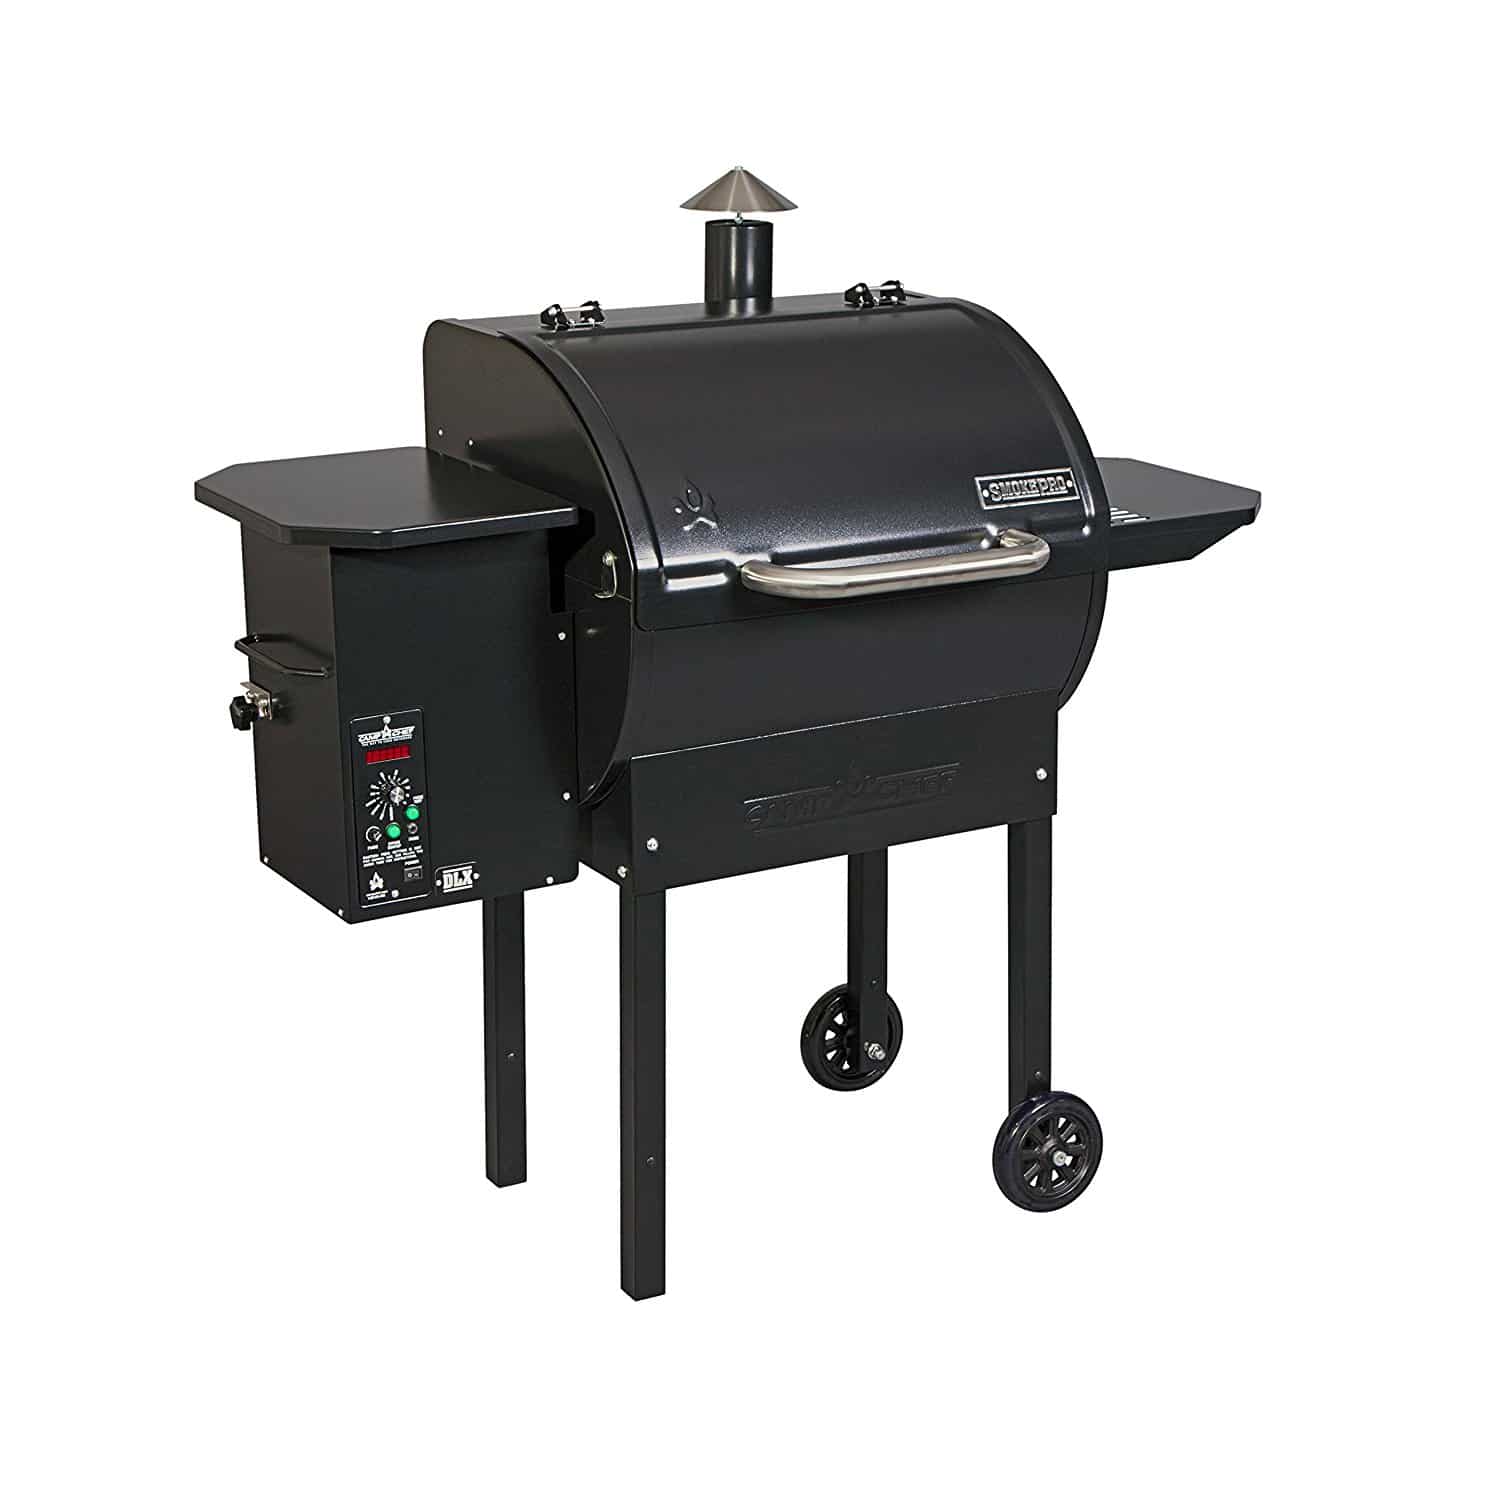 Camp Chef Pellet Grill and Smoker Review